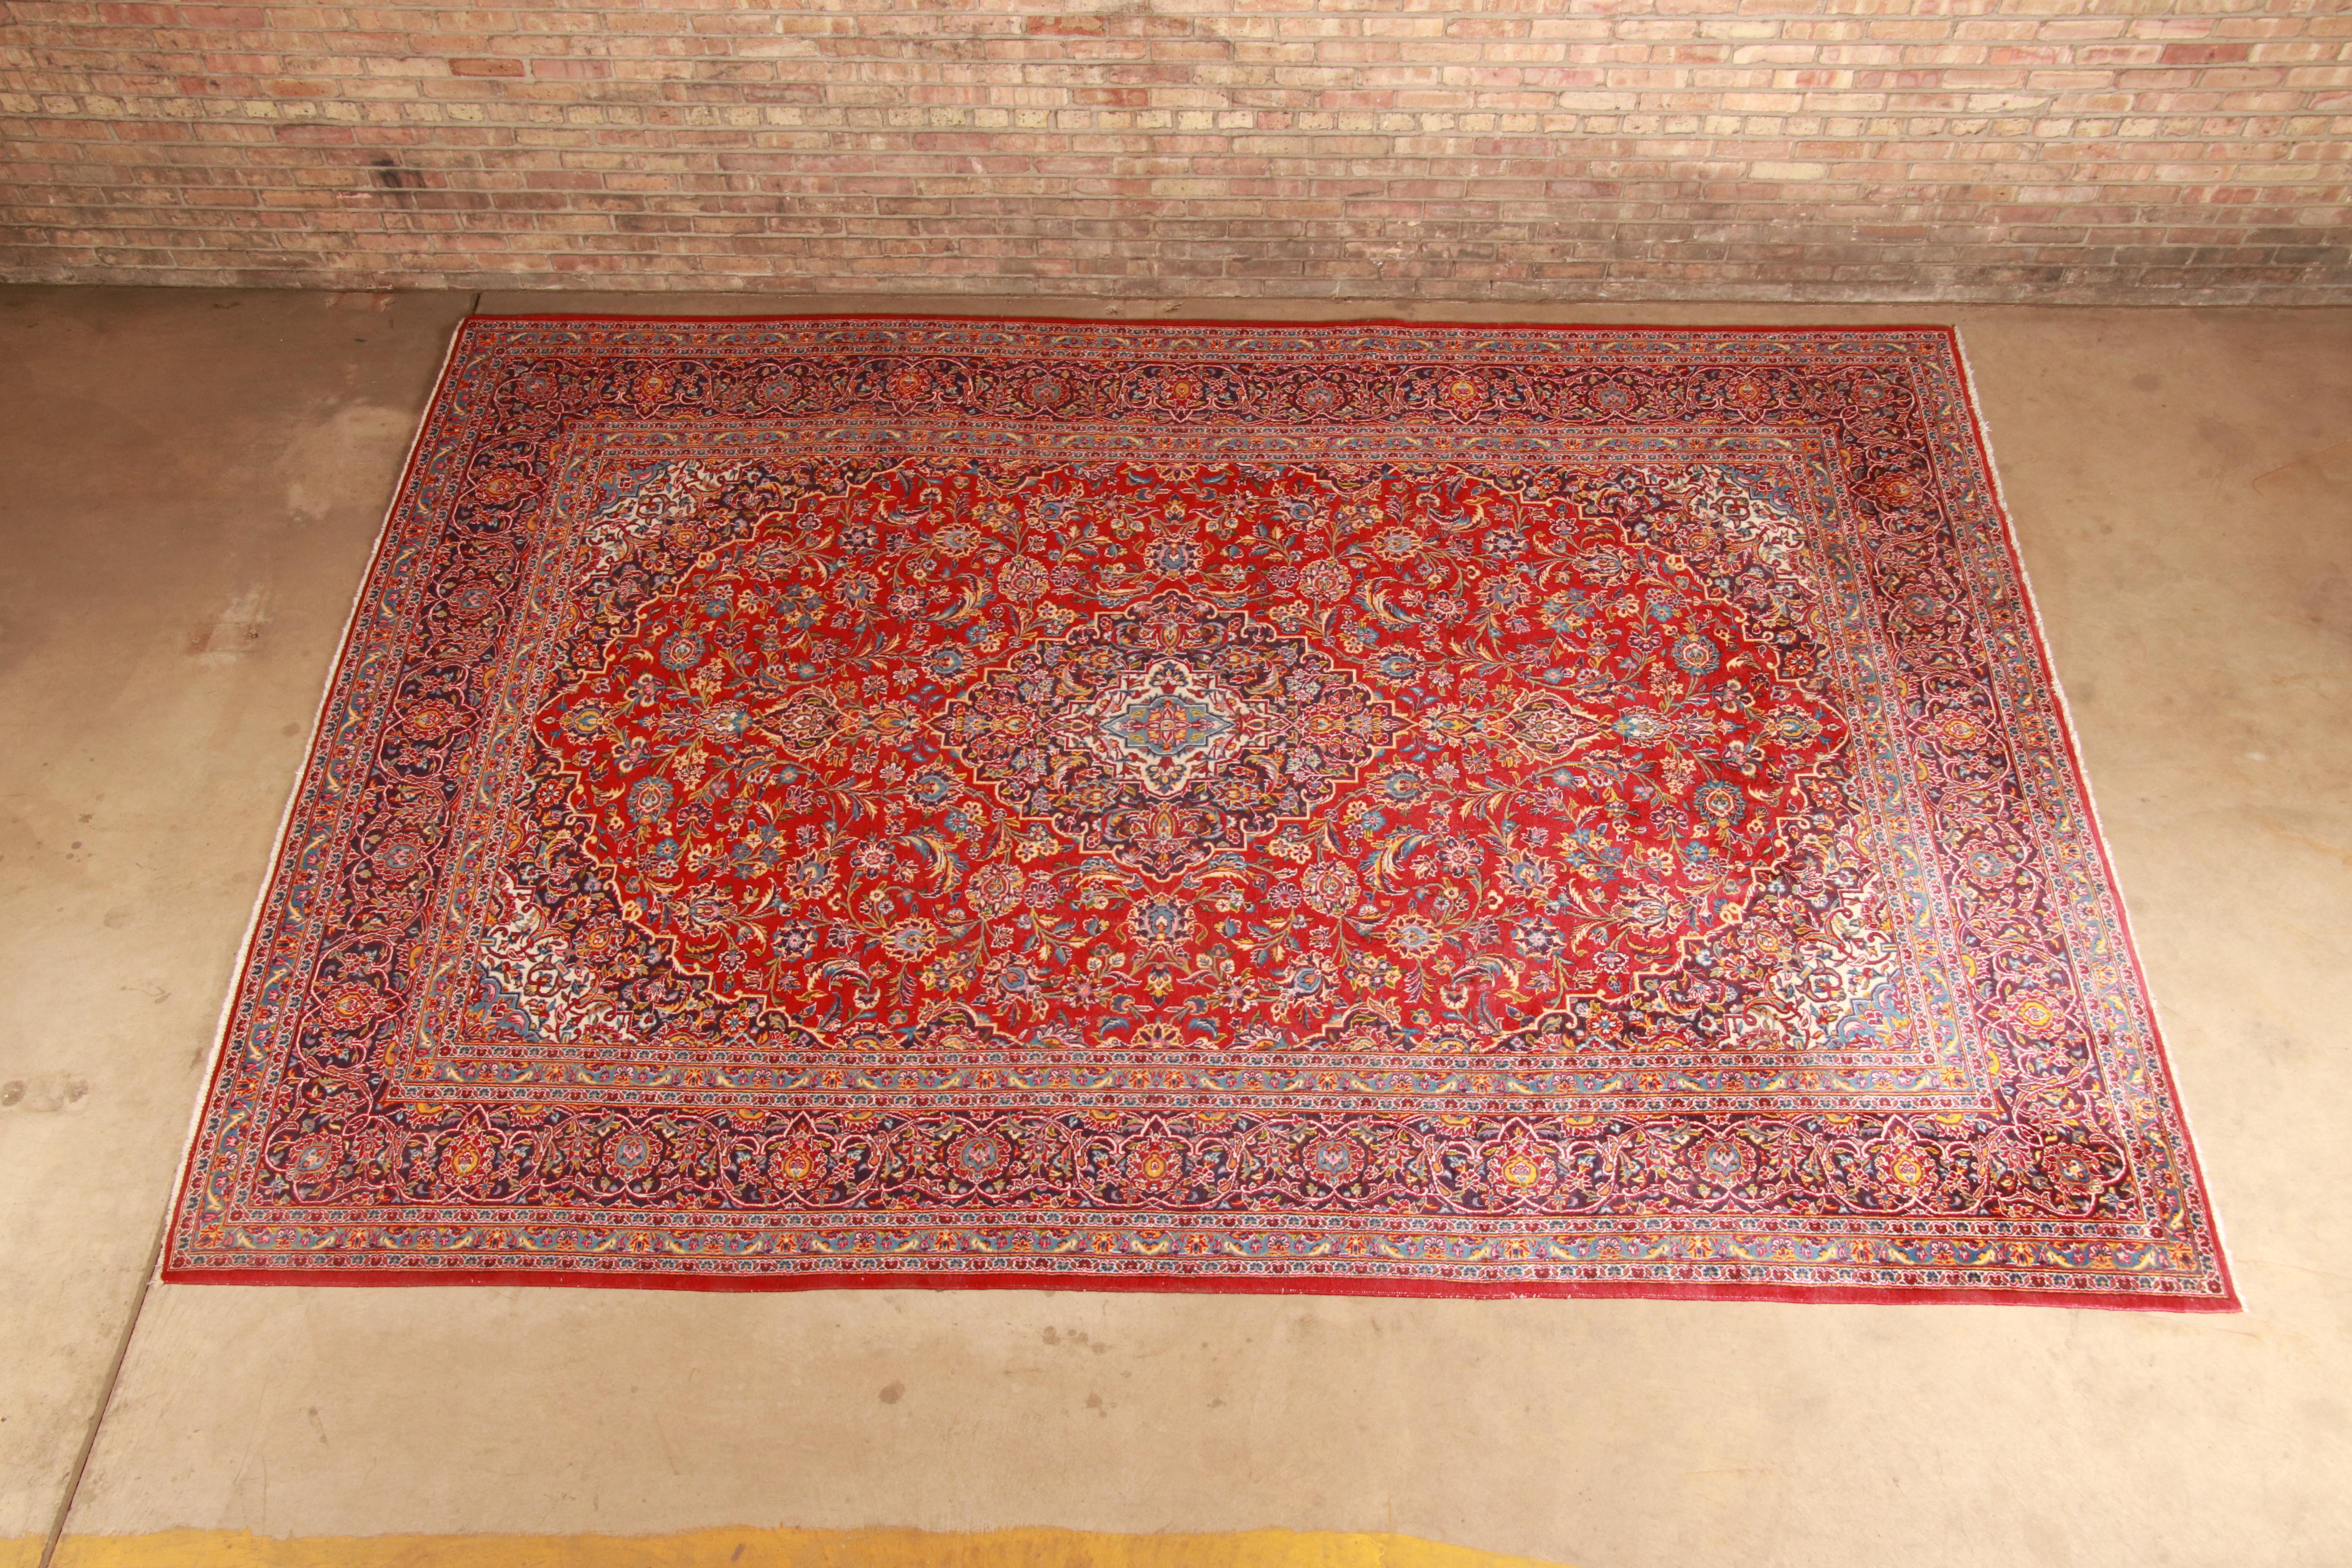 A gorgeous vintage hand knotted Persian Kashan area rug,

20th century

Classic design with floral sprays and bouquets in a red field with center medallion, and rich royal blue border.

Measures: 9